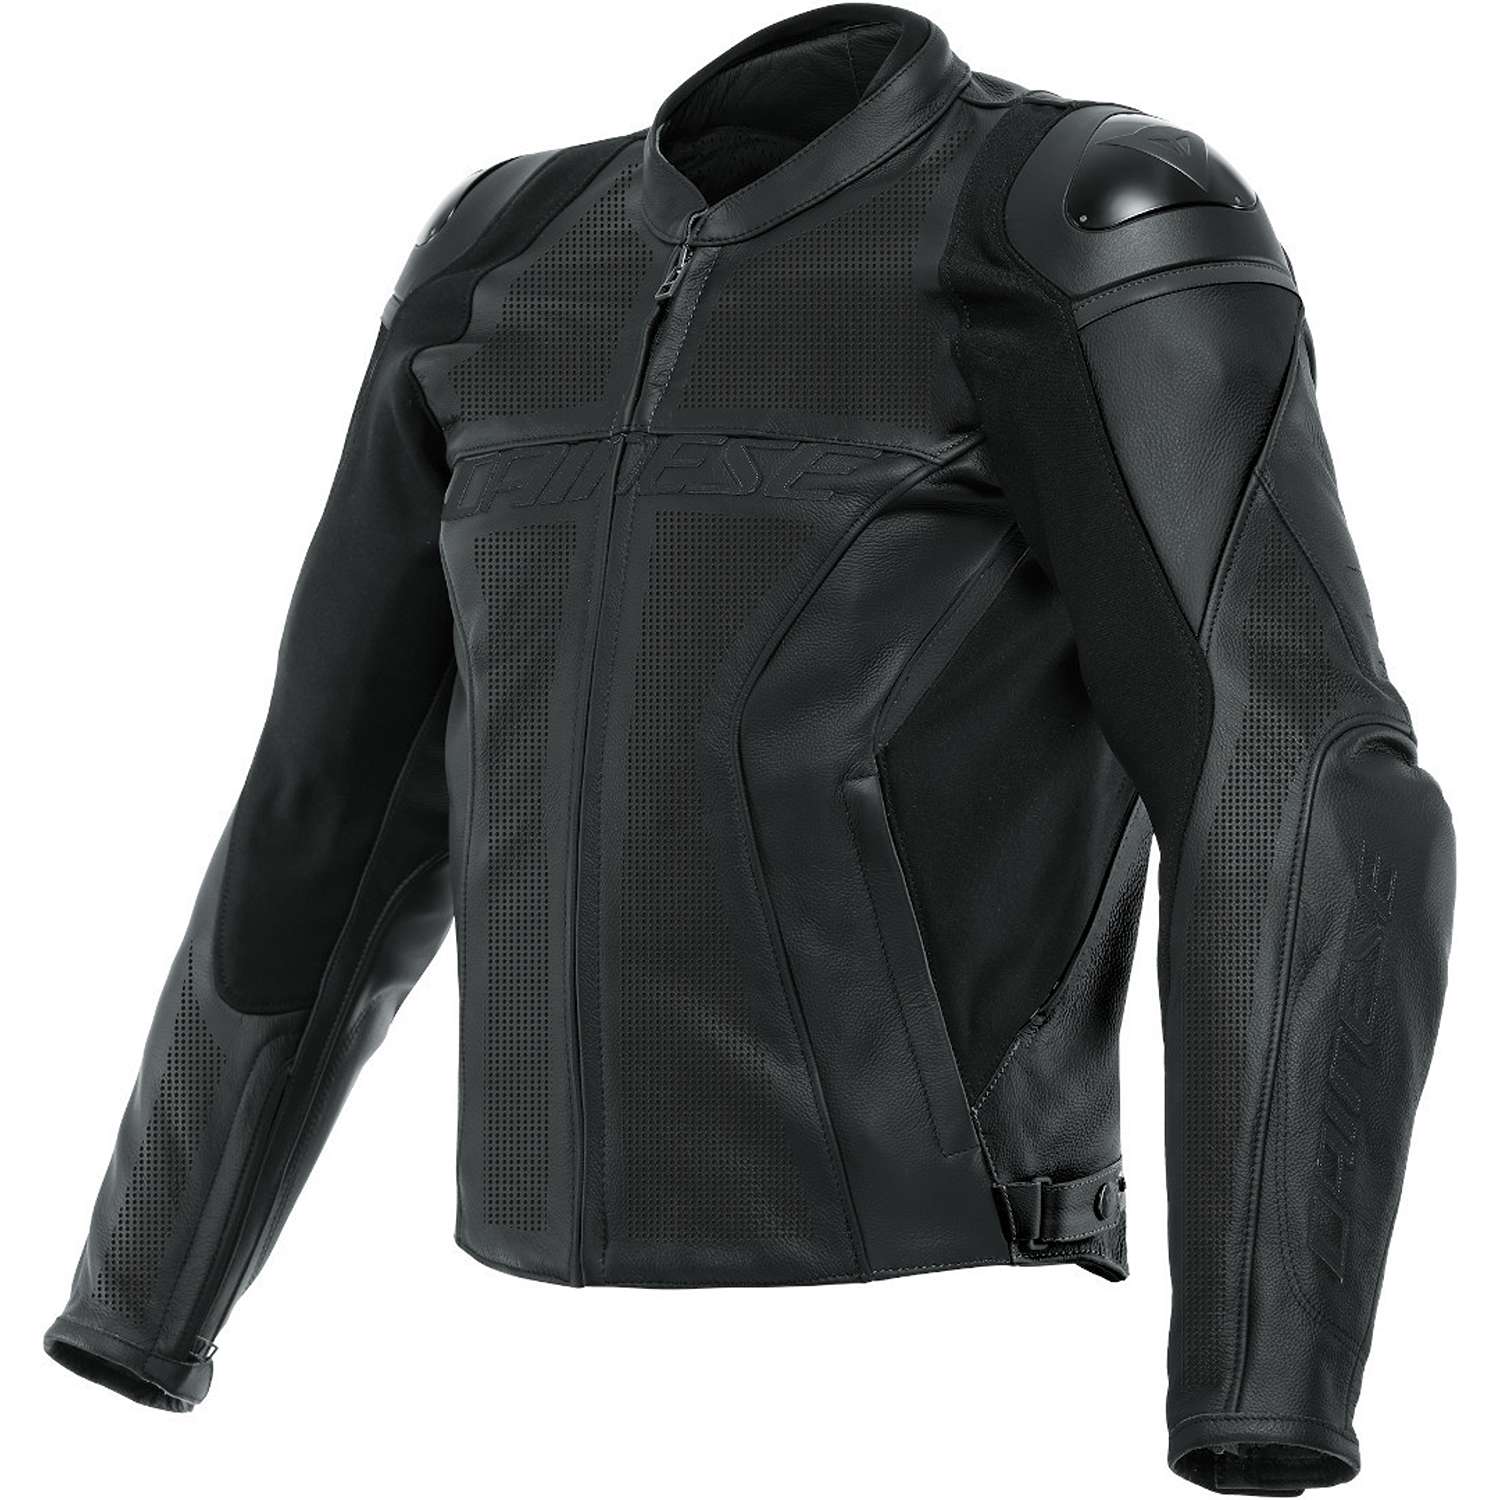 Image of Dainese Racing 4 Leather Jacket Perf Black Size 50 ID 8051019483607